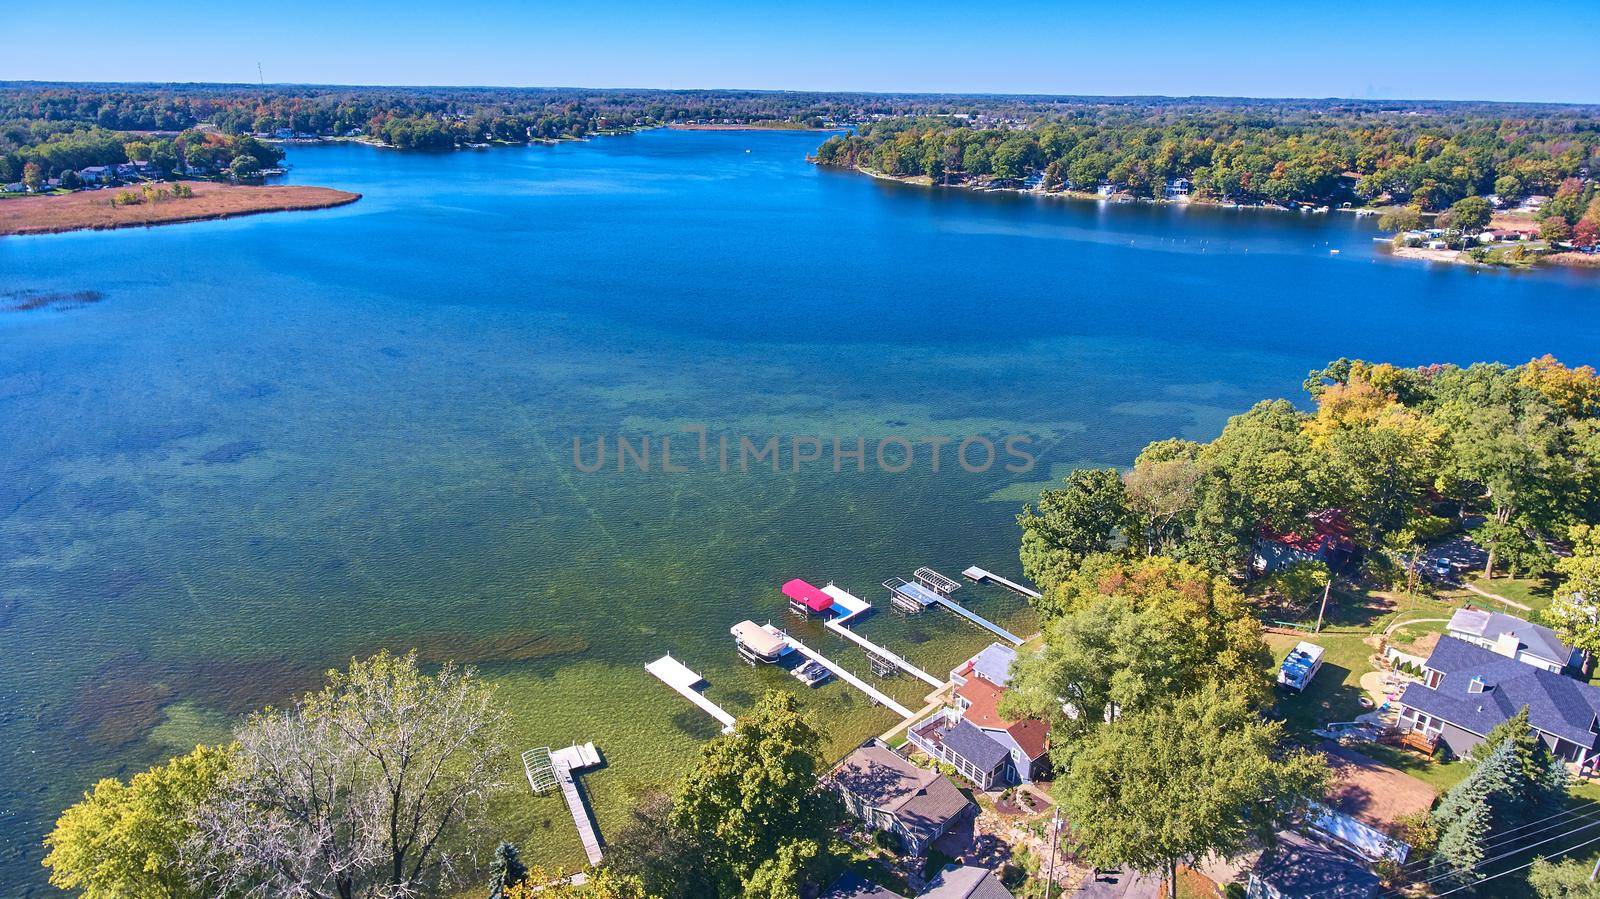 View above lake properties on bright blue lake with docks by njproductions